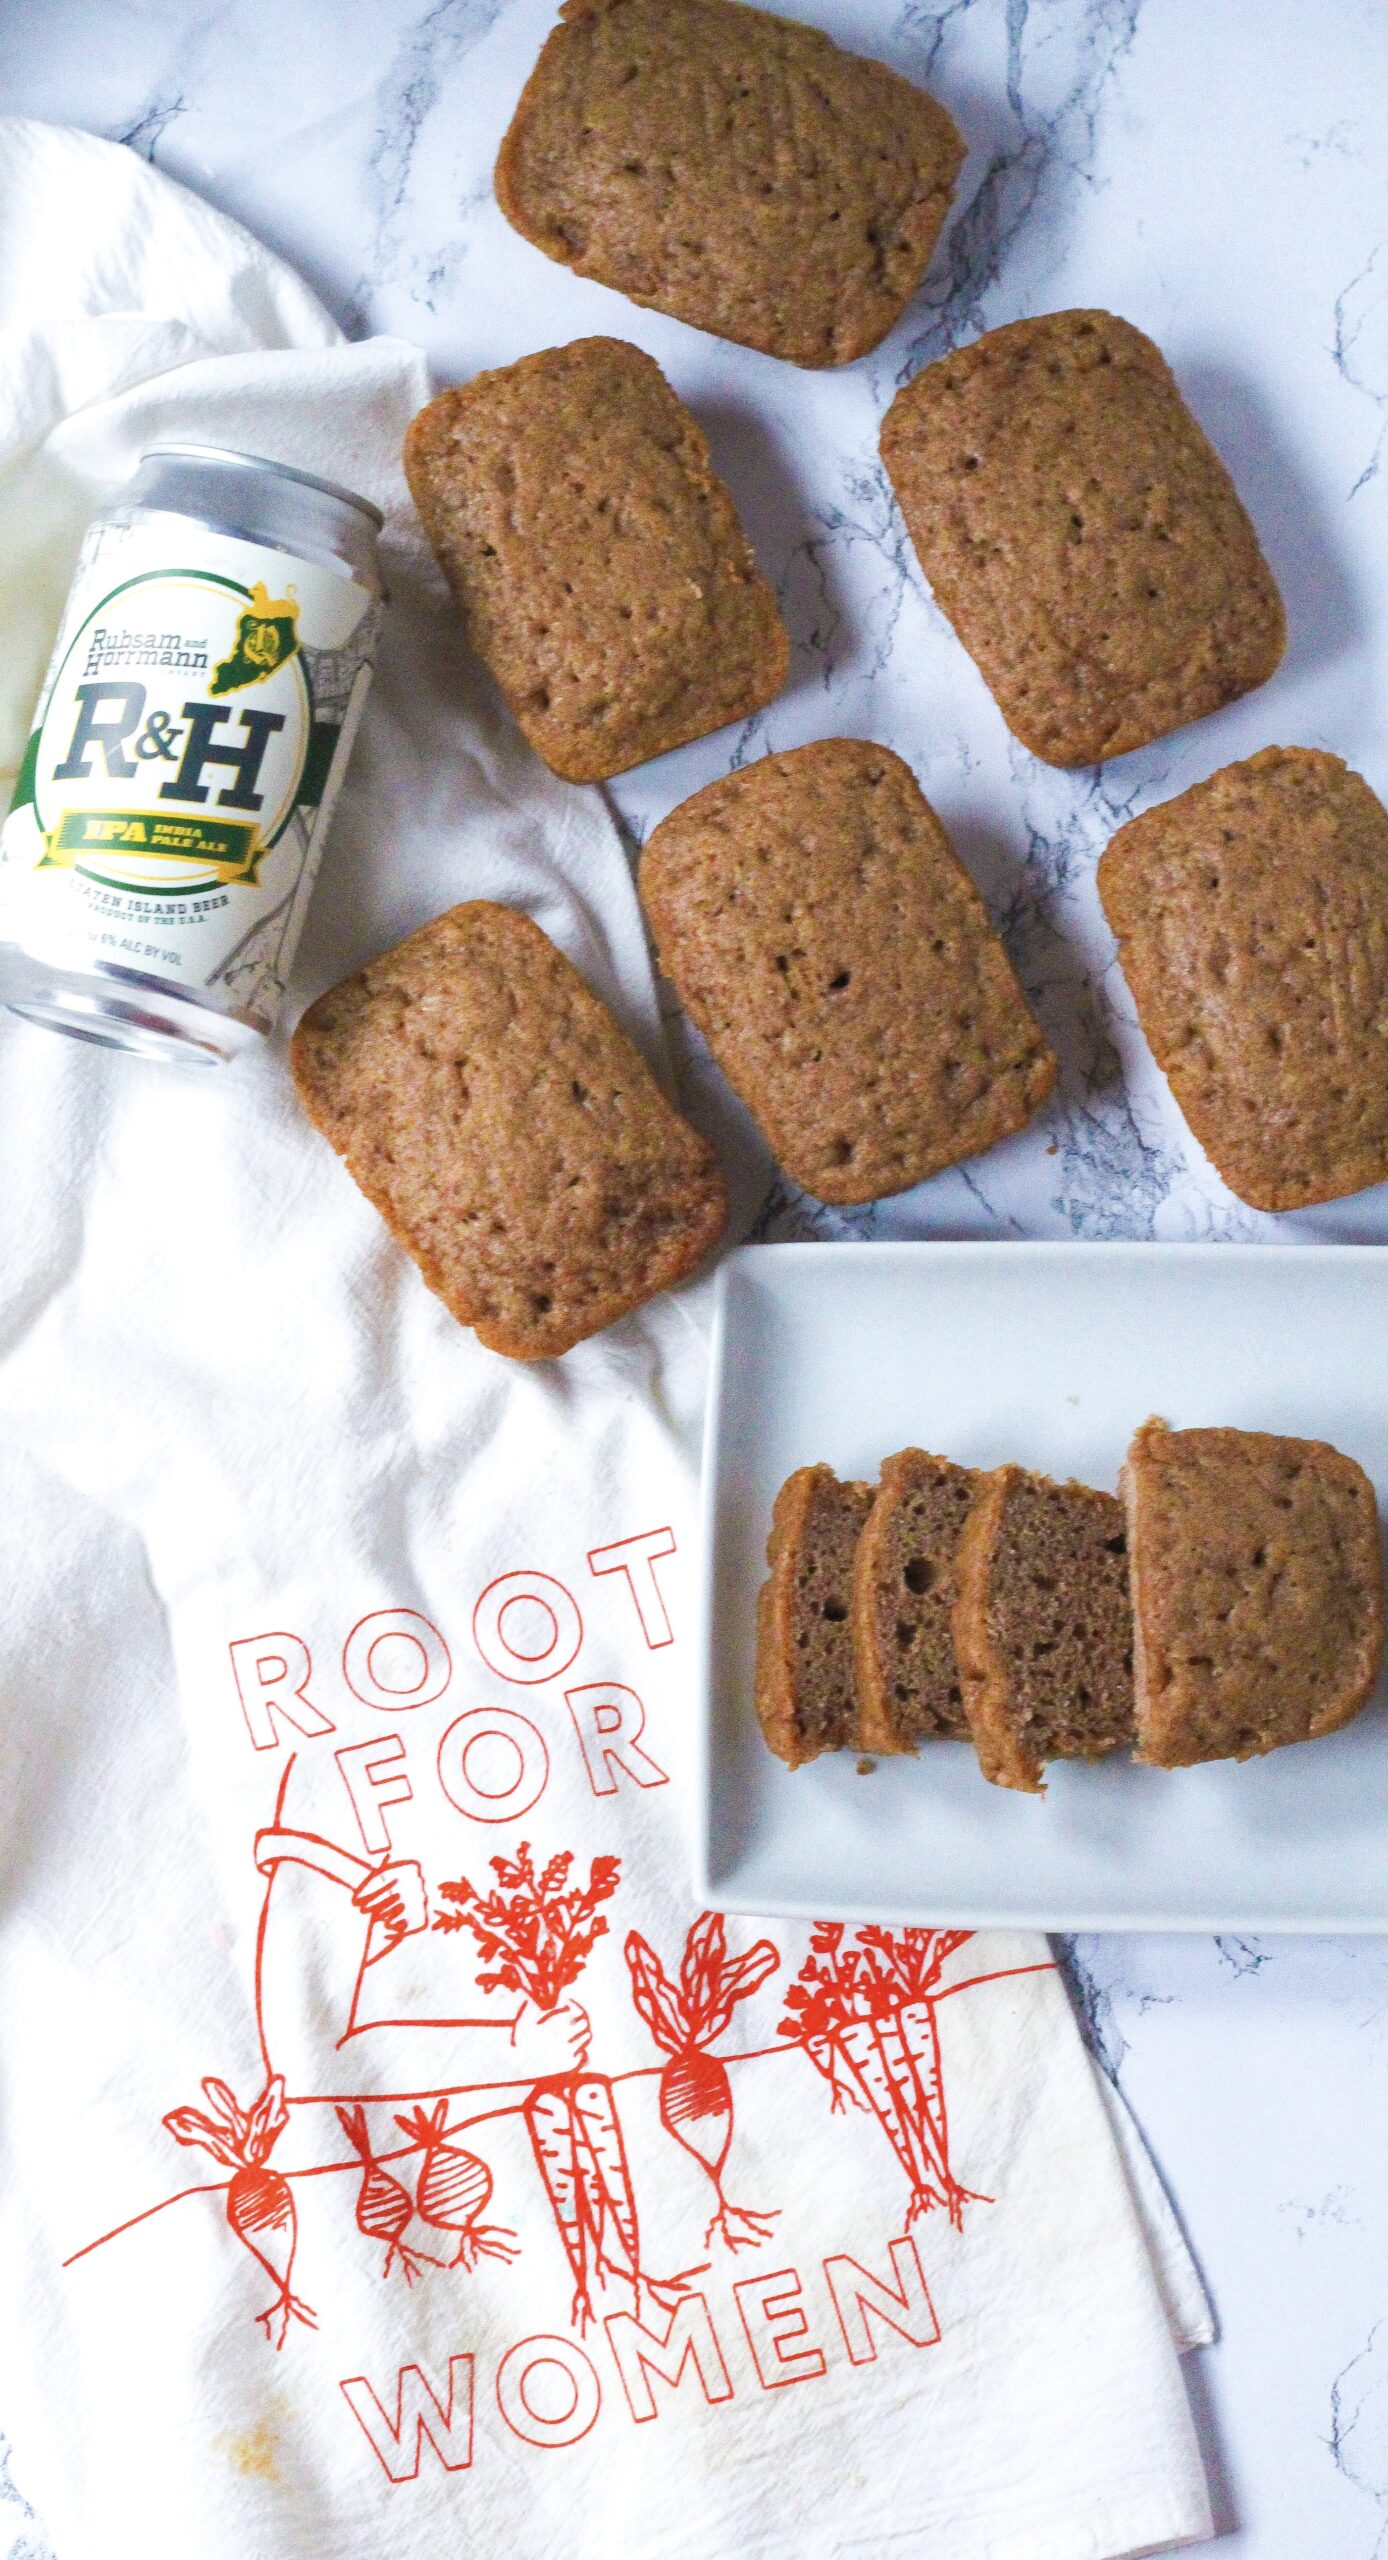 Top down view of, on the left side of the photo is a white dish towel that says Root for Women in red with root vegetables on it. In the upper left of the image on top of the towel above the words are some mini loaves of spiced beer bread and a can of R&H IPA Beer. On the right side of the photo is a white rectangular plate that slightly overlaps the towel. On the plate in the back is a mini loaf, and in the front is a loaf, the front half of which is sliced into three slices.